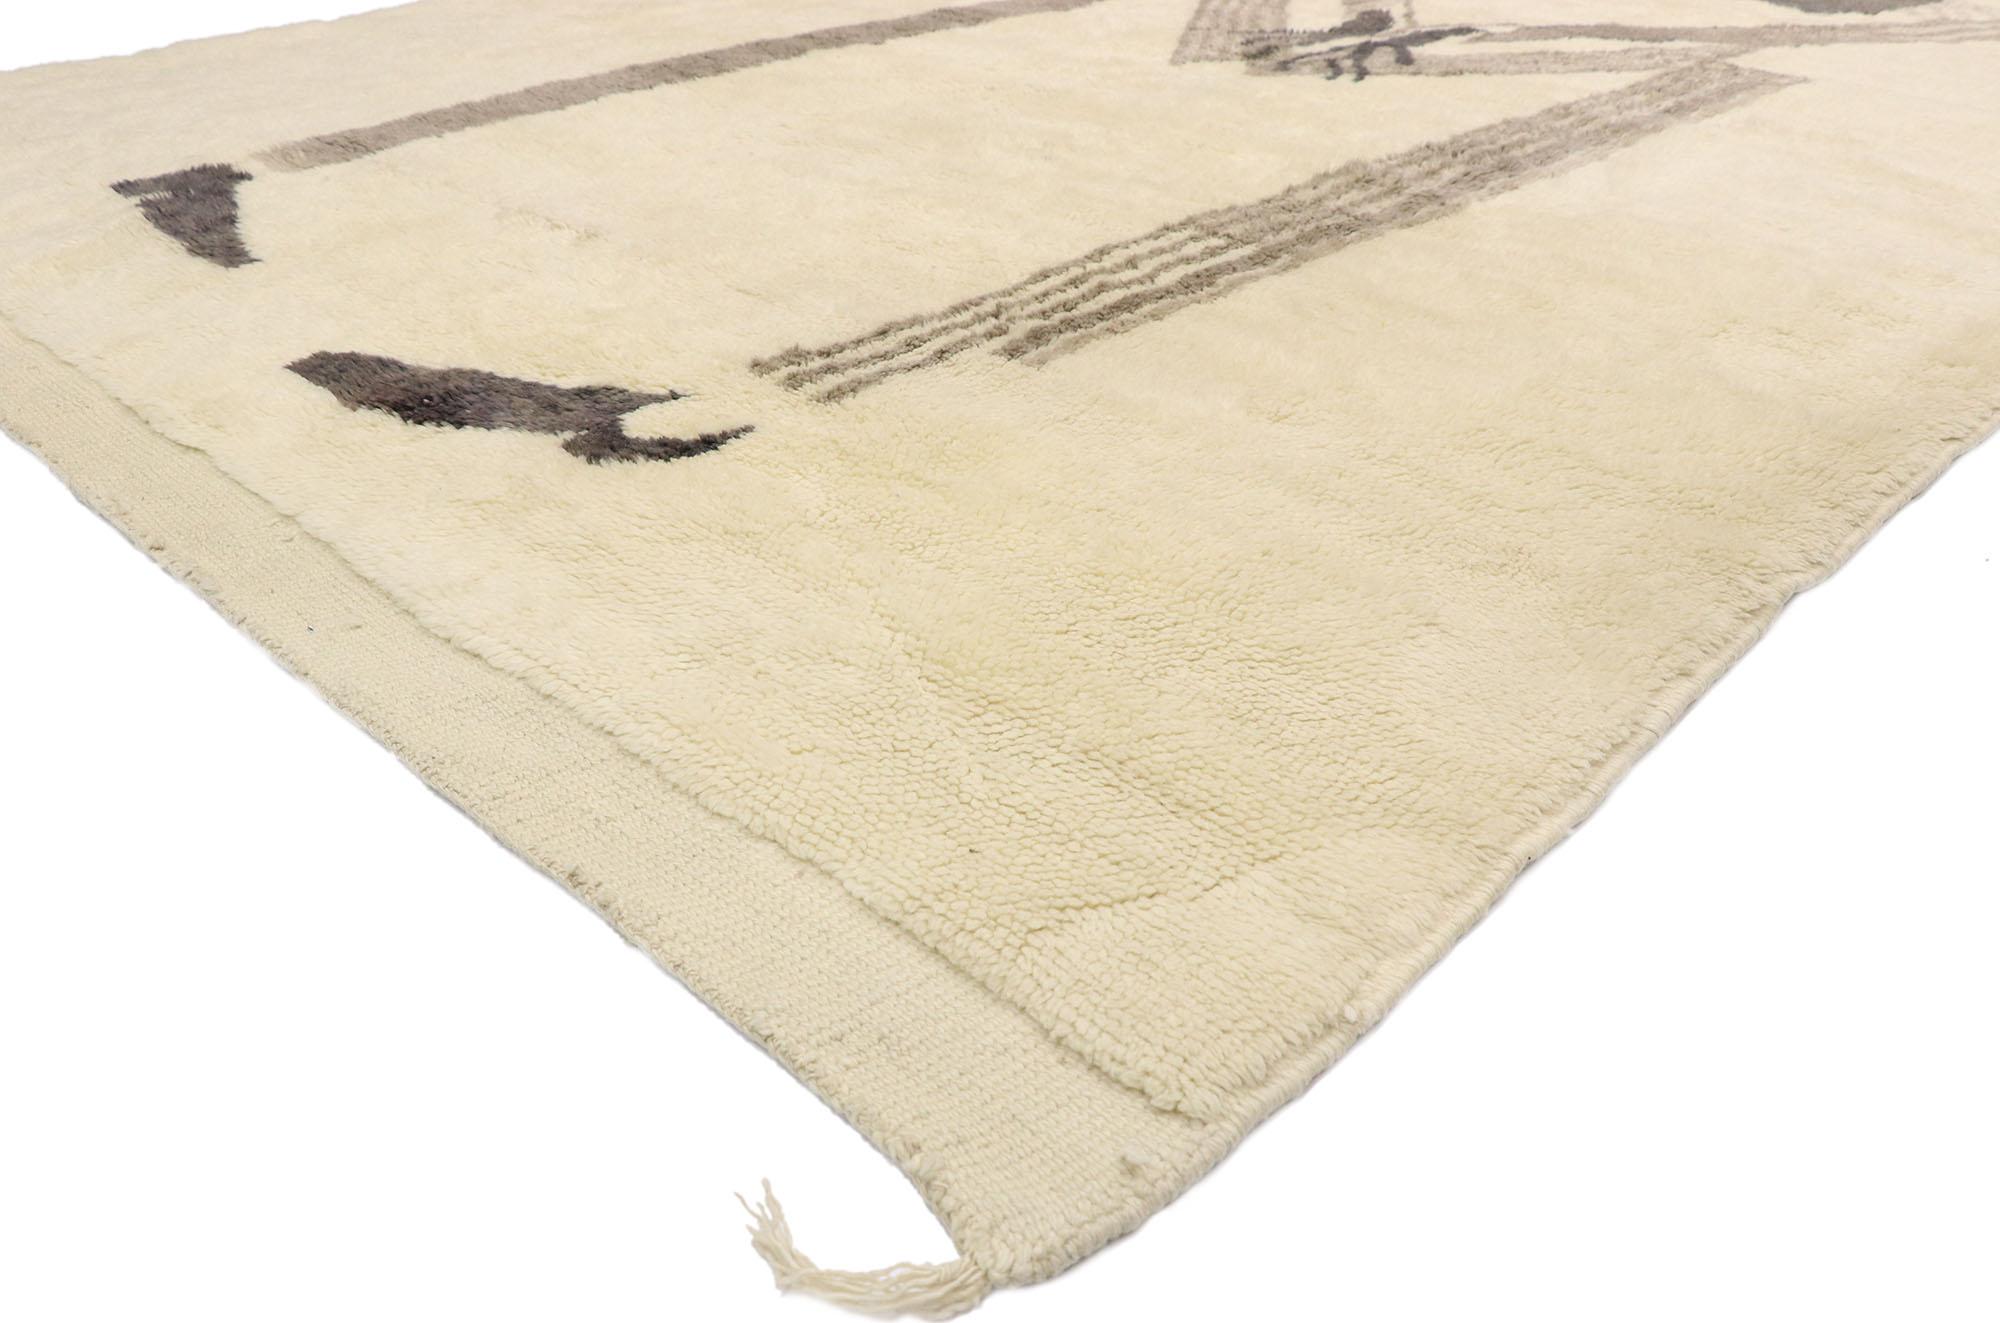 20924 New Berber contemporary Moroccan rug with Minimalist style and figurative art design. Drawing inspiration from Sorrowing Old Man At Eternity's Gate by Vincent van Gogh and sketches styled after Henri Matisse, Raphael and Arthur Bowen Davies,